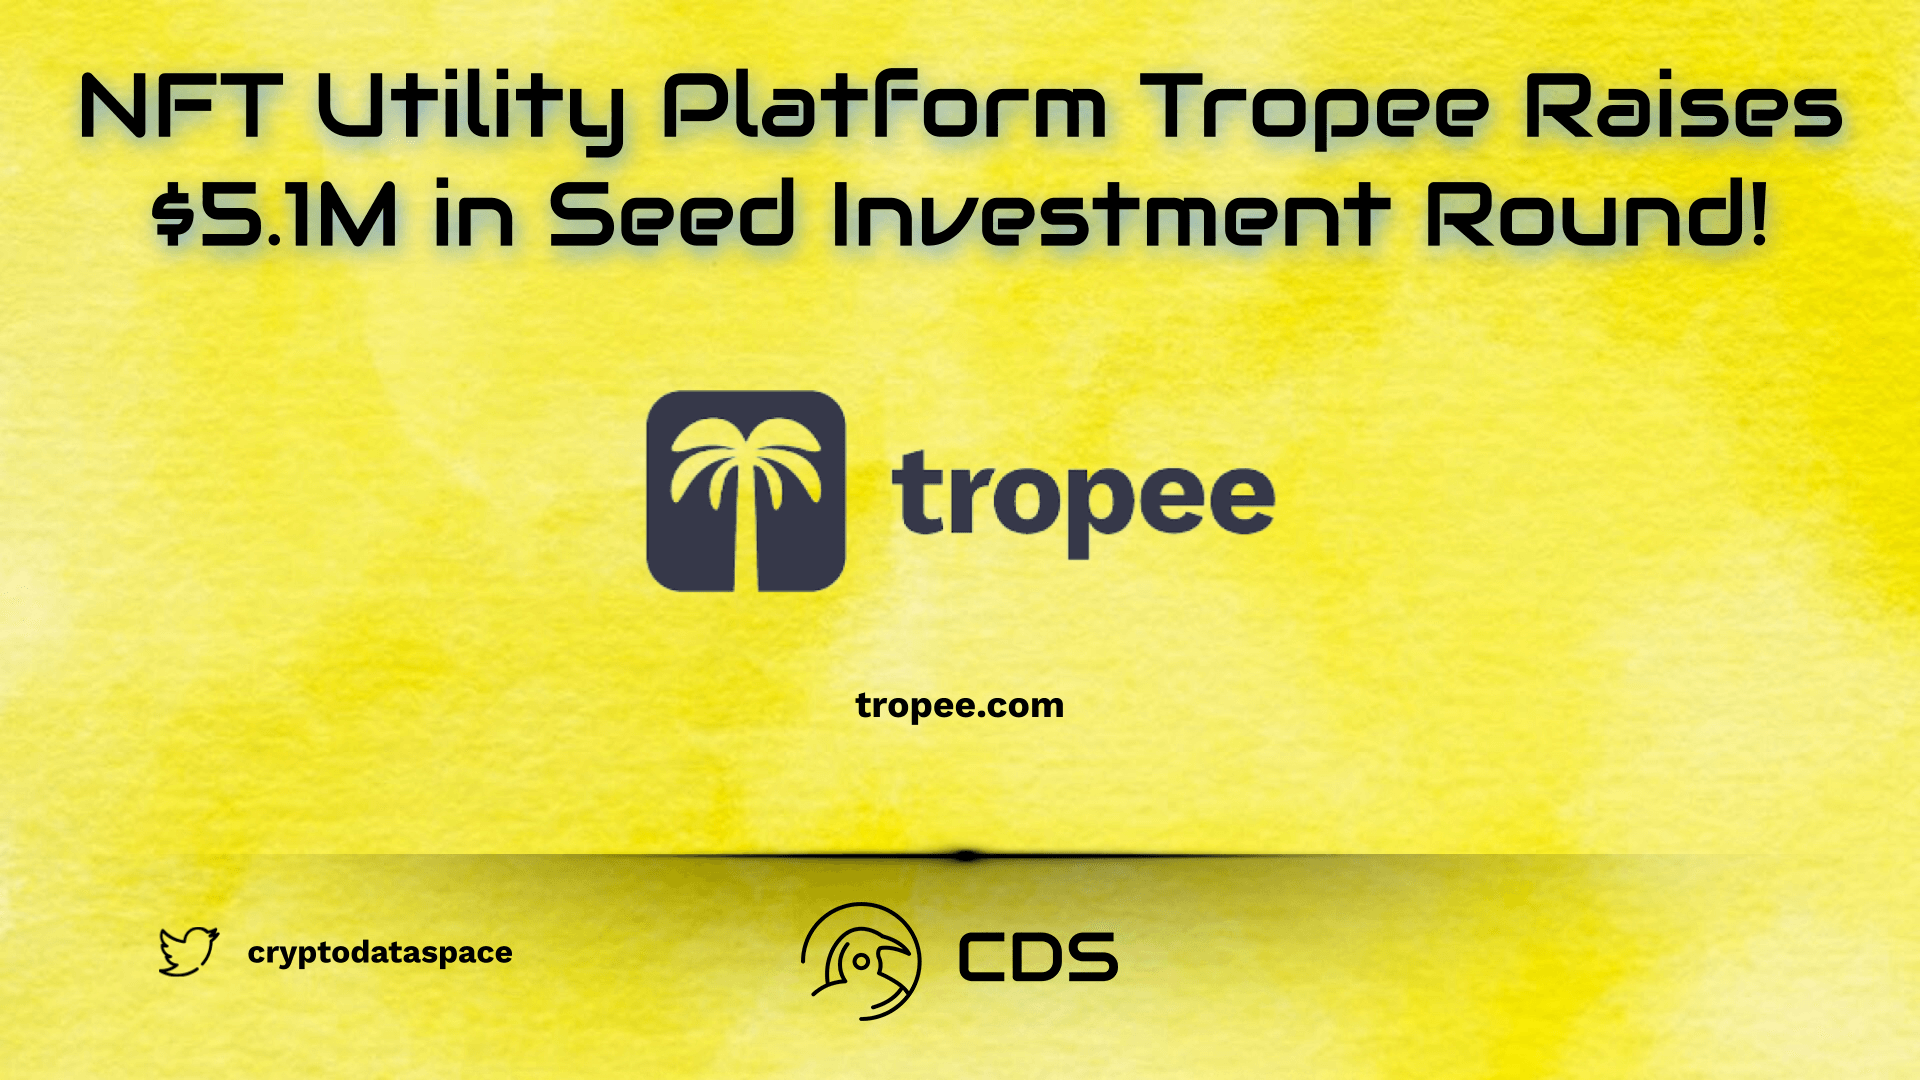 NFT Utility Platform Tropee Raises $5.1M in Seed Investment Round!